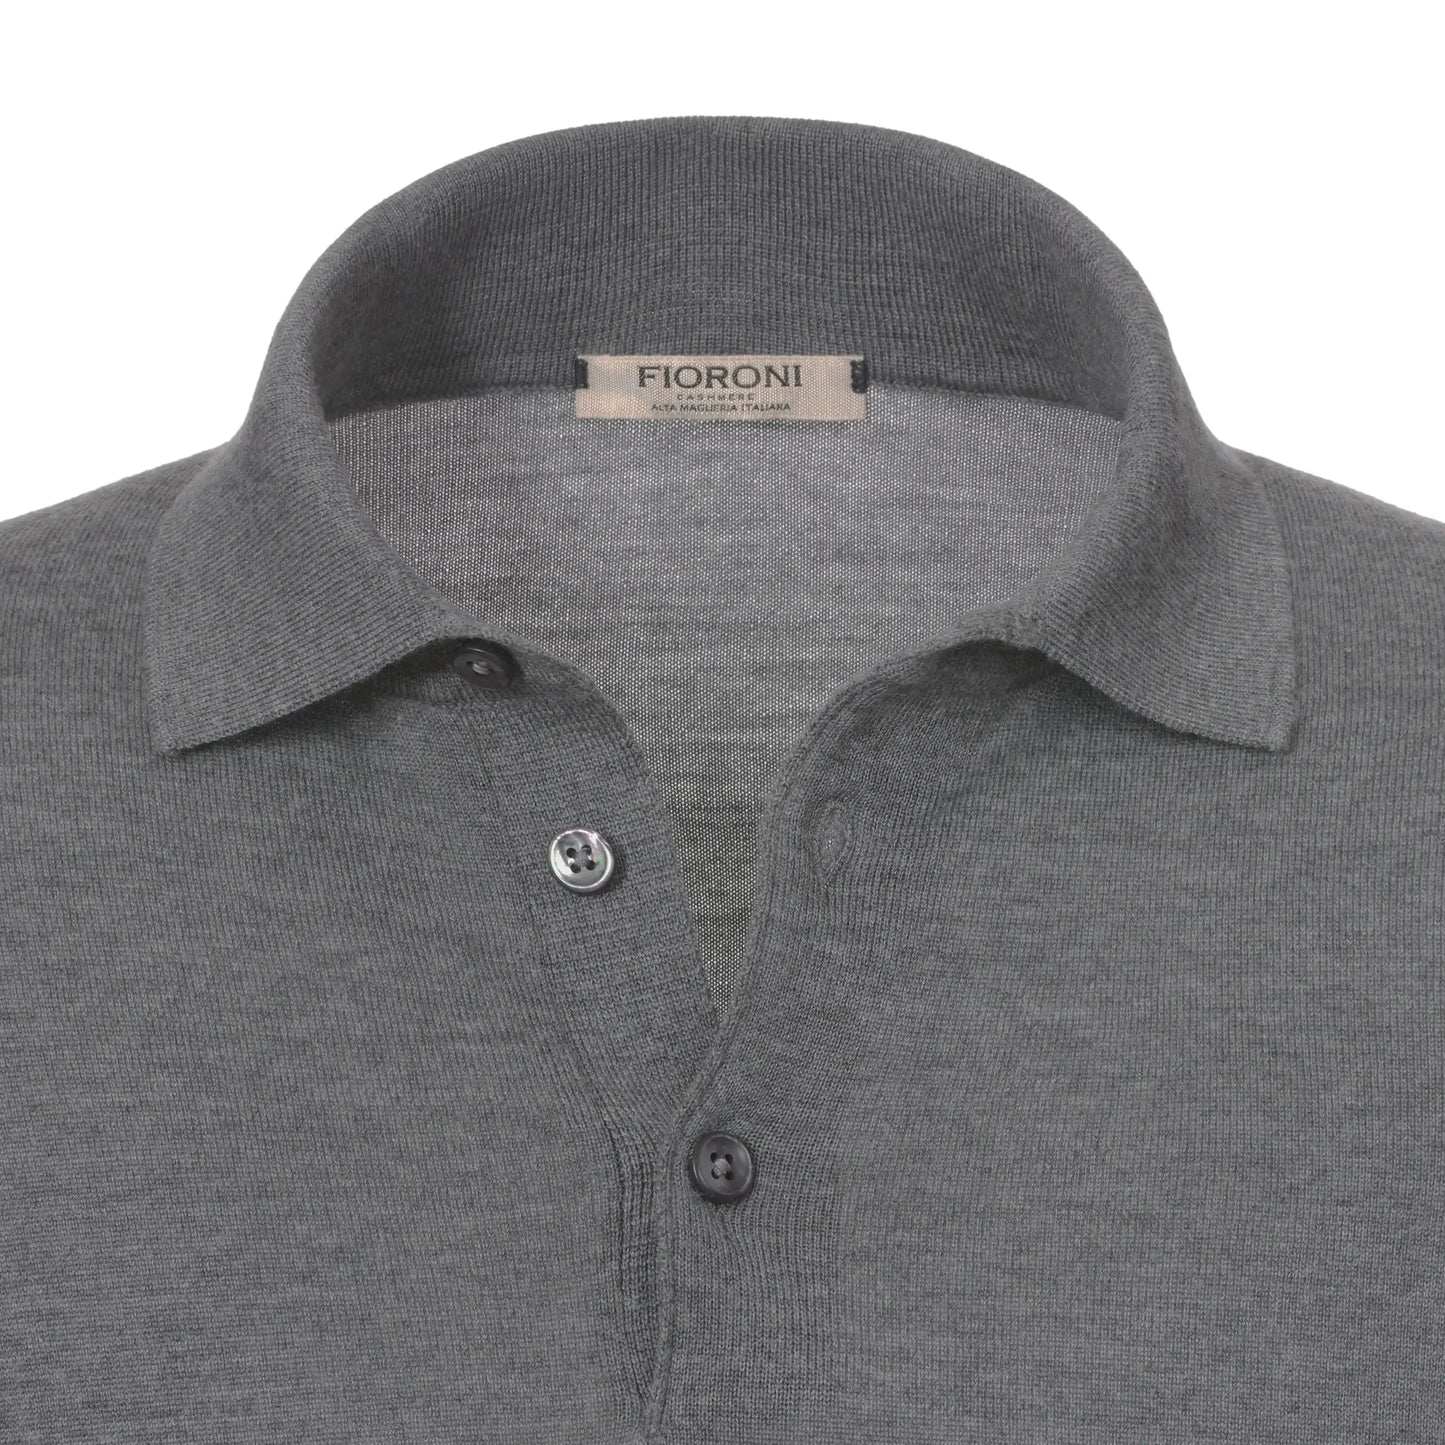 Fioroni Wool - Cashmere Long Sleeve Polo Shirt in Grey - SARTALE